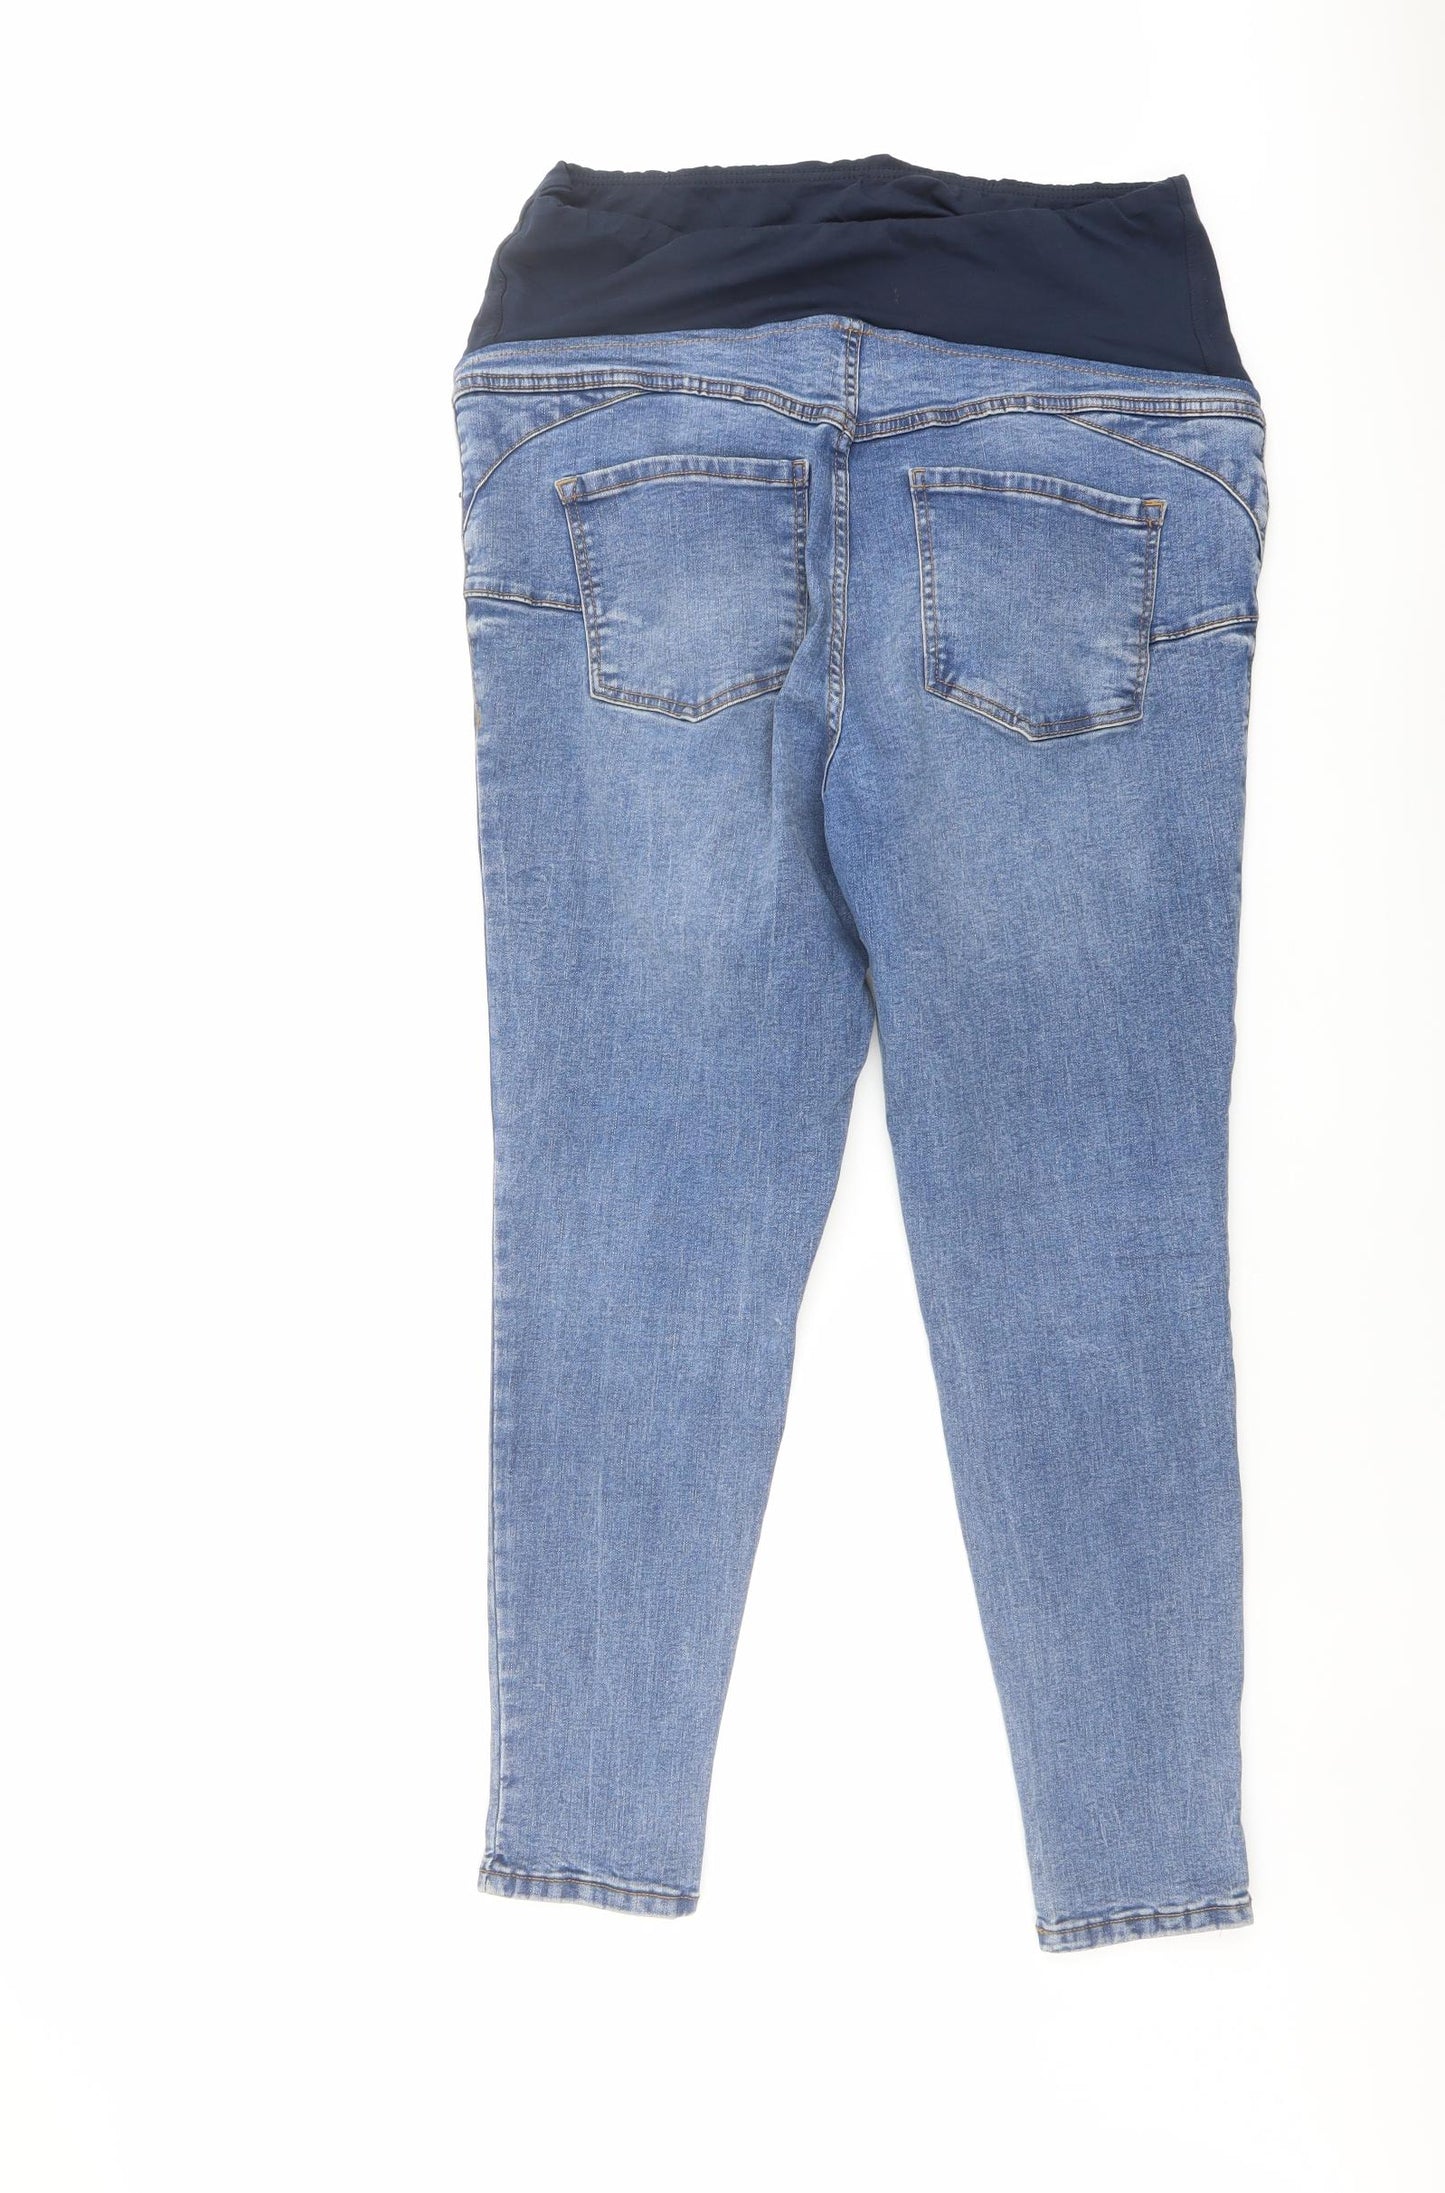 New Look Womens Blue Cotton Skinny Jeans Size 16 L26 in Regular